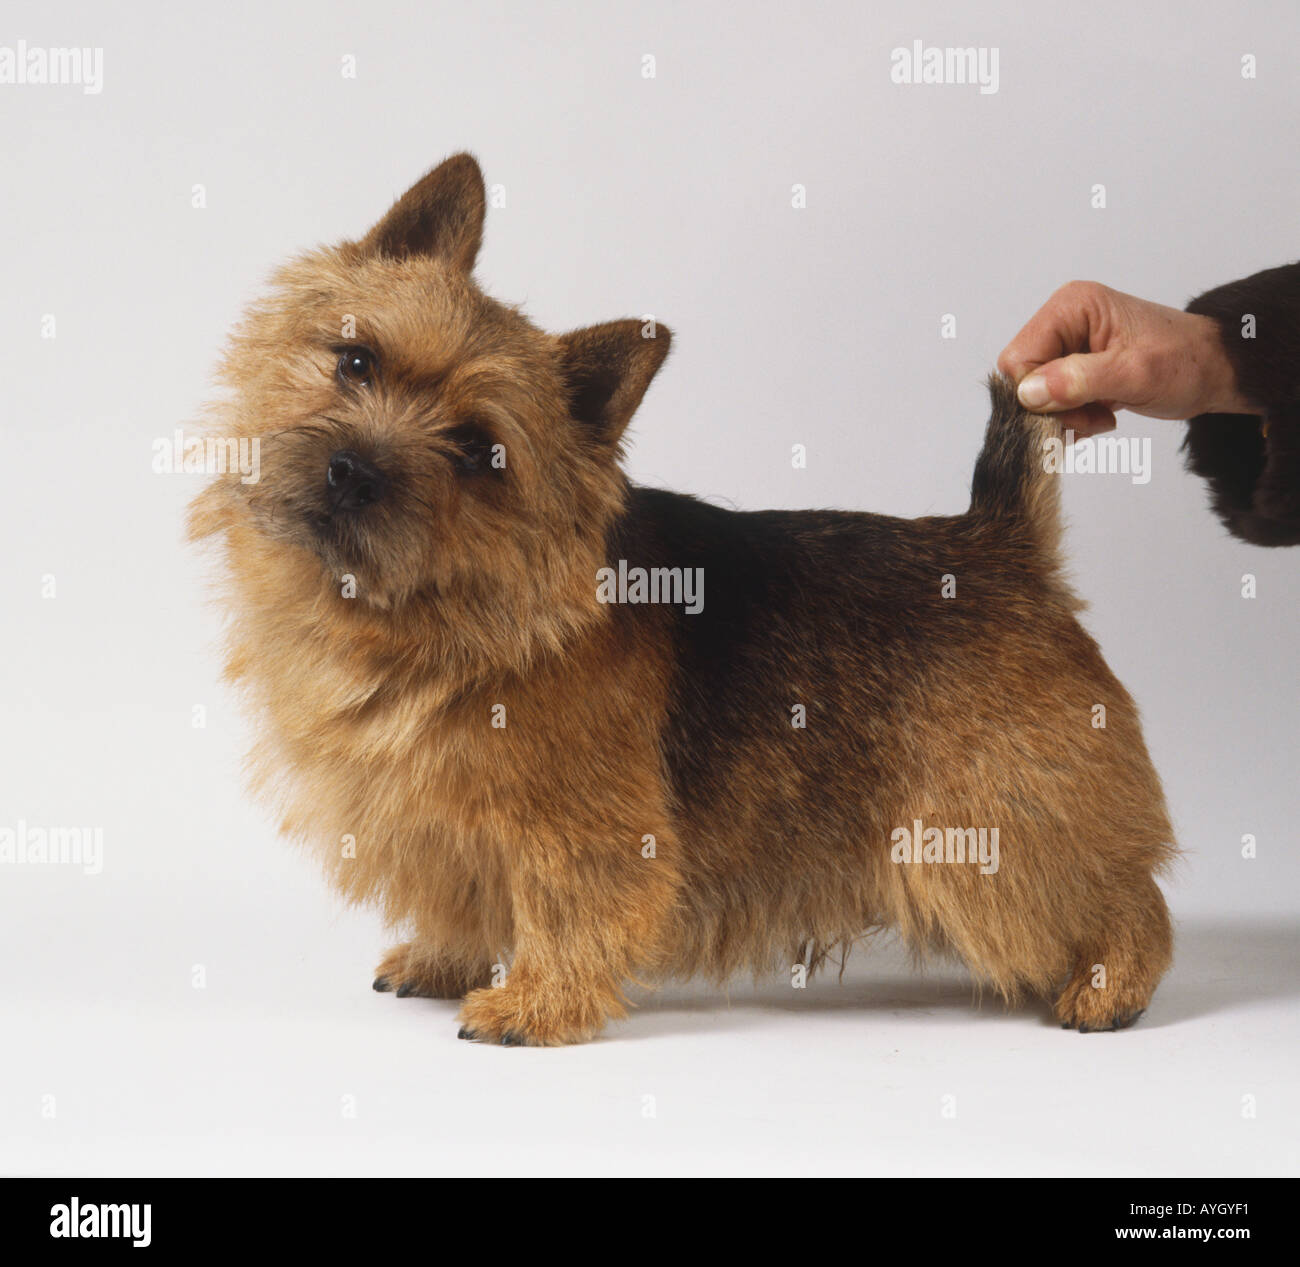 Norwich terrier on all fours with head tilted. Stock Photo